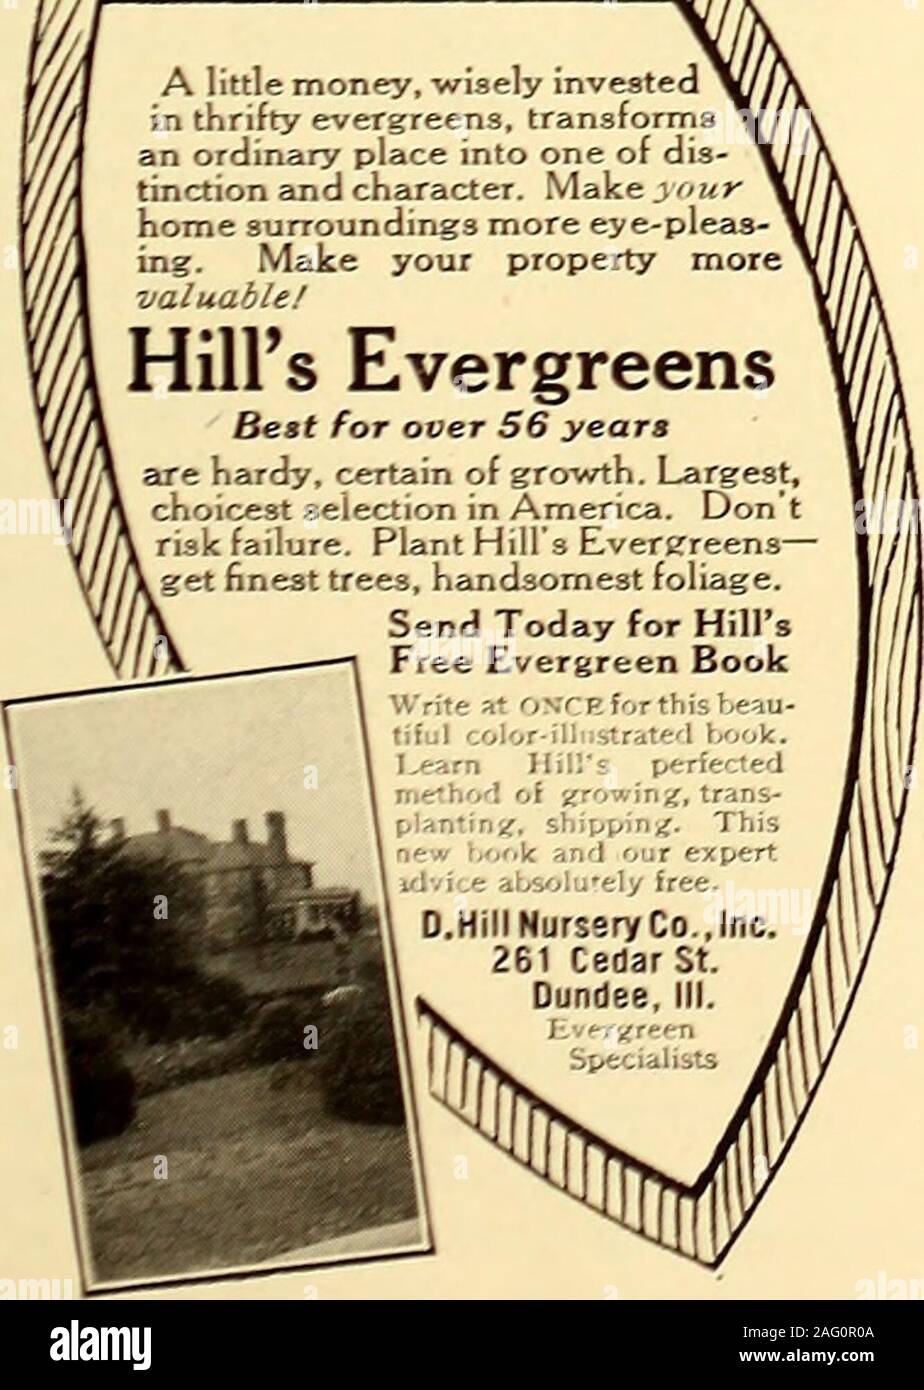 . American homes and gardens. DwarfApples Fruiting Sizes Send for Catalog.The Elm City Nursery Co.New Haven, Dept. M., Conn. ^Kp^ JAPANESE DWARF TREES and Species. 1.—Several varieties. 2.-7years to 85 years old. 3-—Size ; 6 in. tall,6 in. spread, to 17 in., to 30 in. spread.4.—Shape and style; Mount Fuji, RisingSun, Setting Sun, Flying crane, tiers, etc. garden JAPONICA 1305 W. 43rd St., Kansas City, Mo. Rare Beauty Taste,EleganceForYourHome. butter, or diced and served with a creamsauce. But on no account let it get aheadof you. Raising Okra is another satisfactoryexperiment. This vegetable Stock Photo